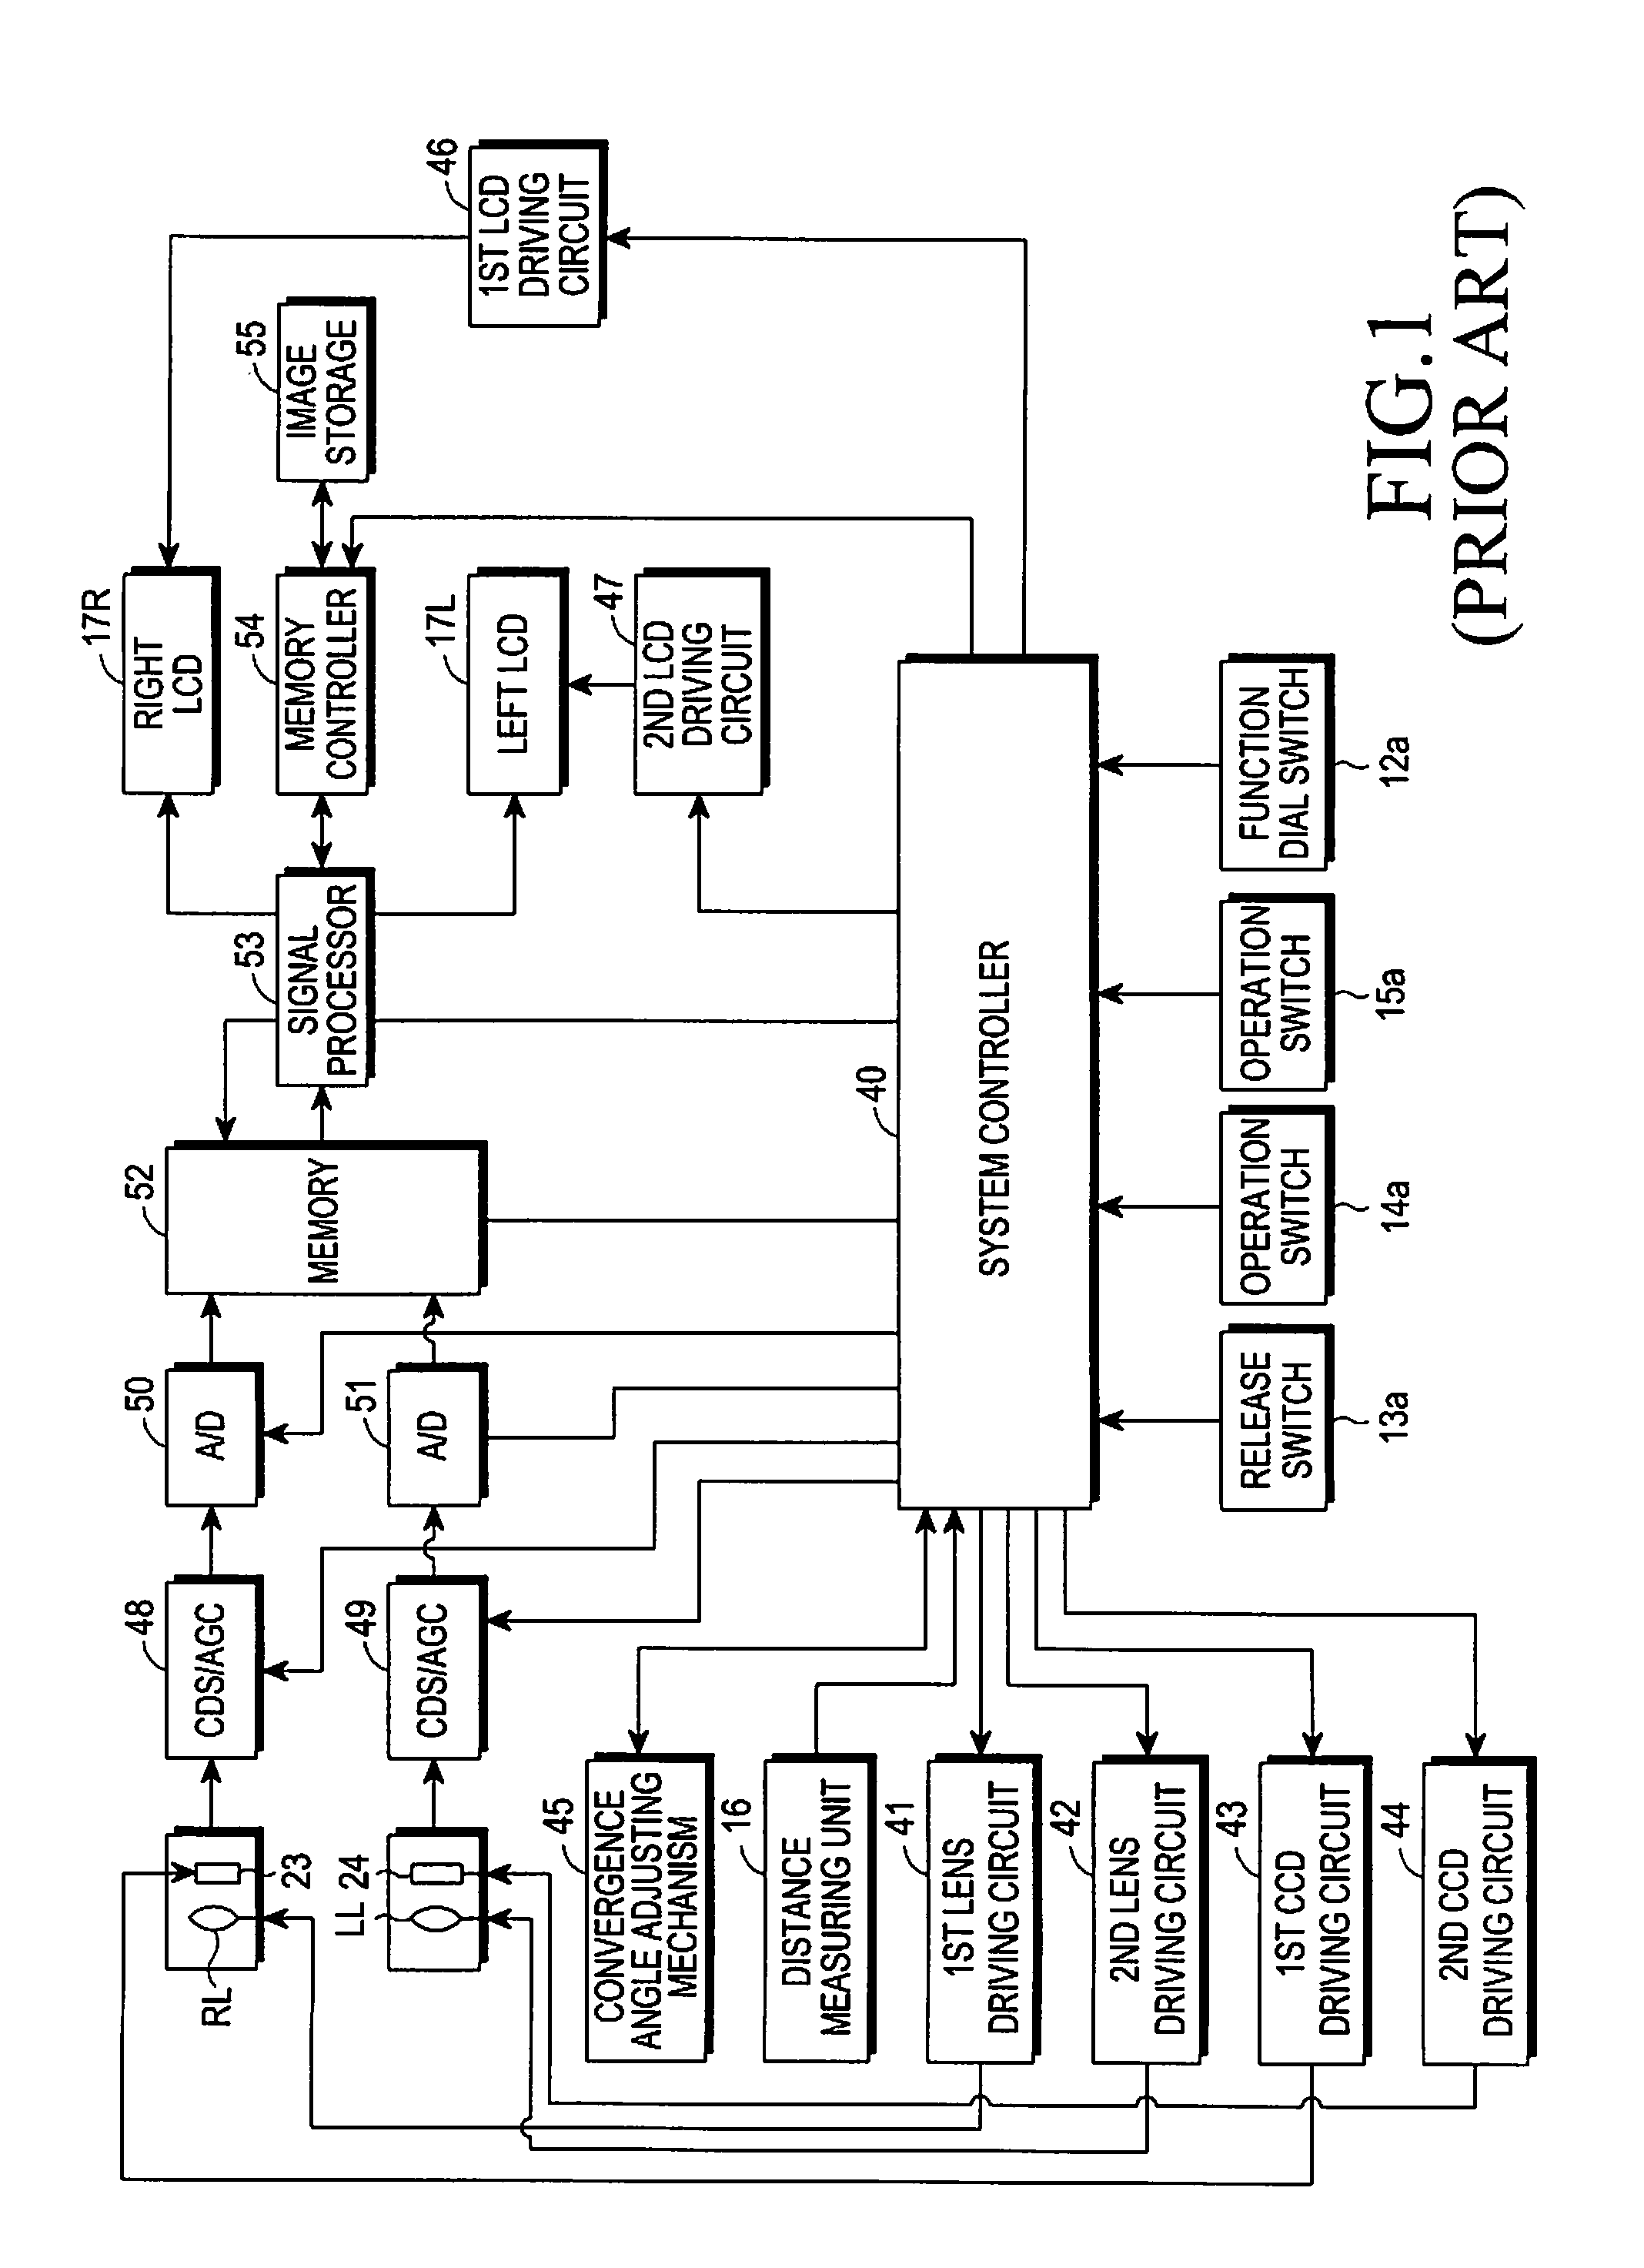 Method and apparatus for determining a convergence angle of a stereo camera